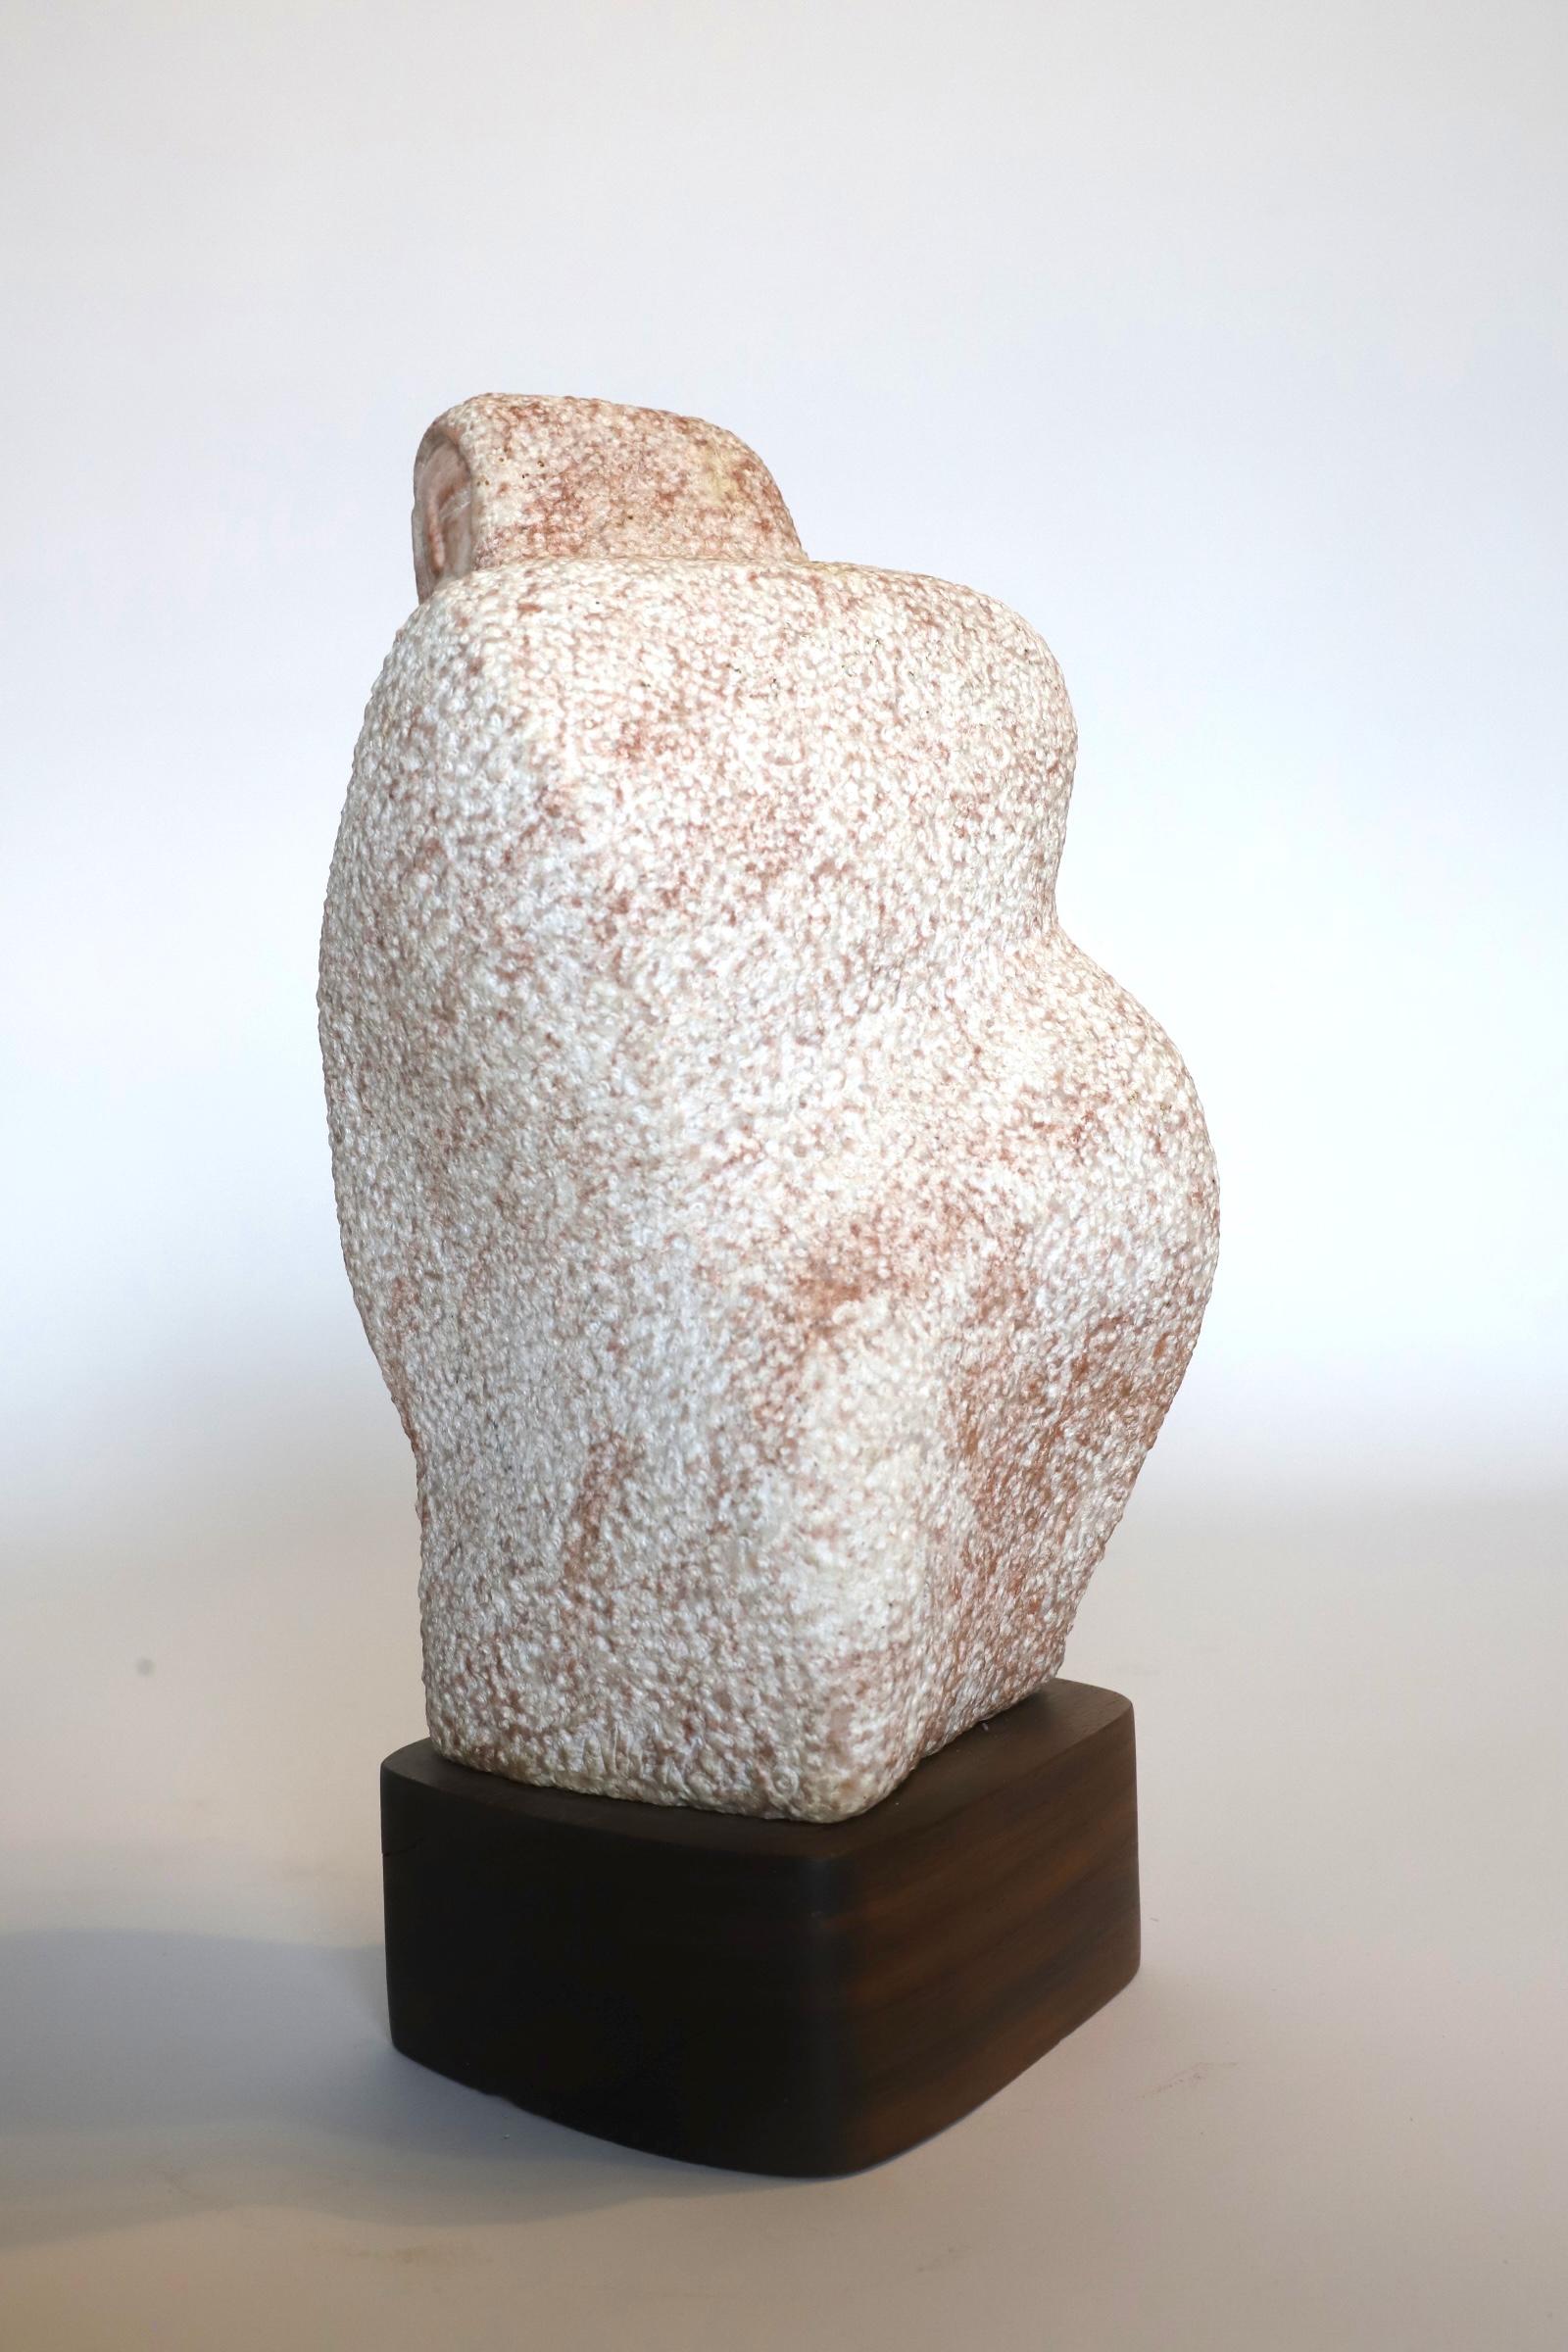 Simplistic Native American pink granite sculpture on wood base. Piece is signed. Photographed with Eames chair for scale. Wood base photographed darker. See photos.